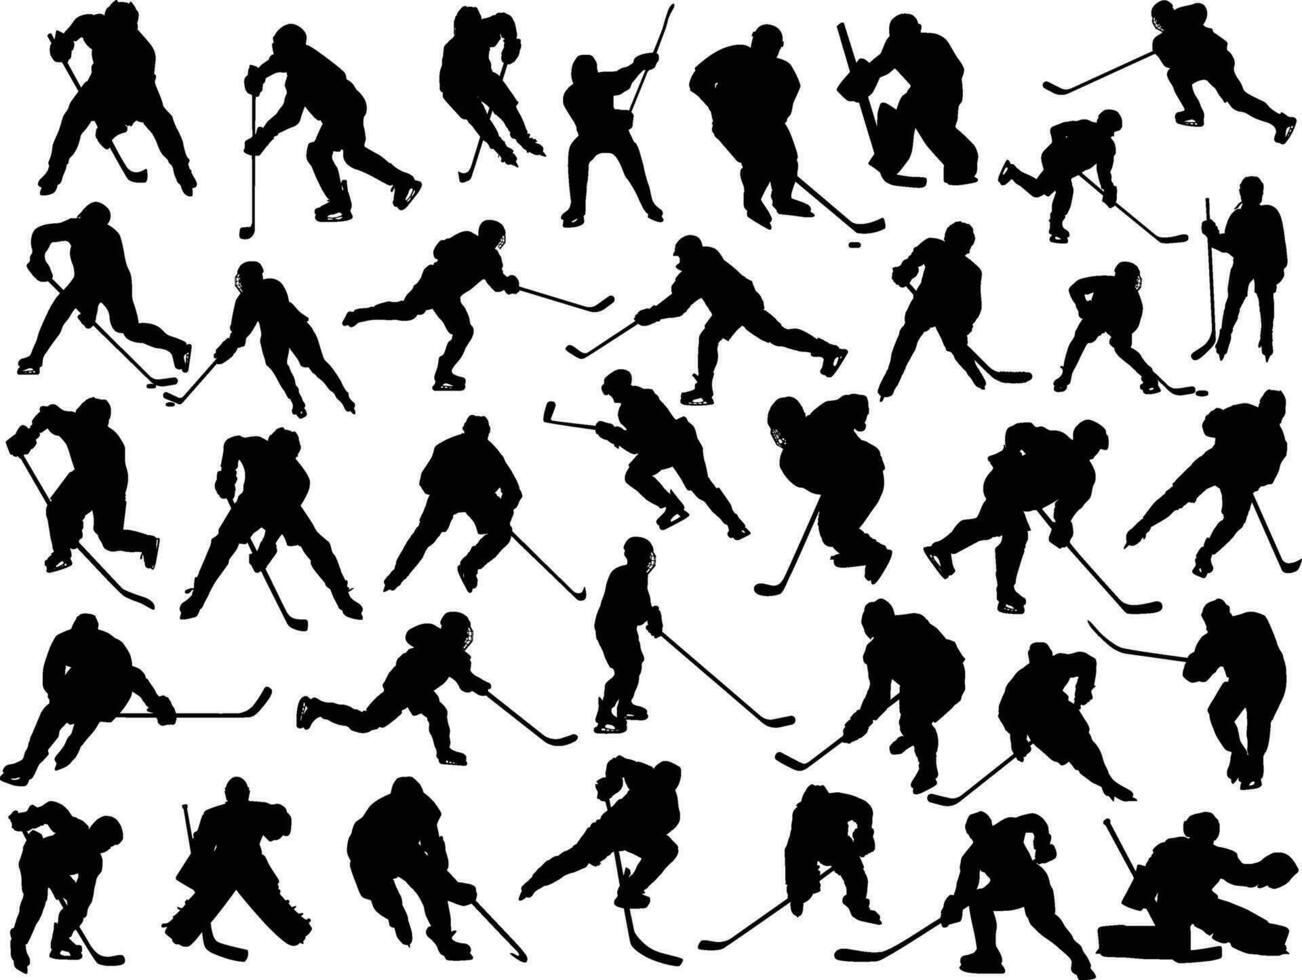 Hockey players silhouettes set vector illustration isolated on white background